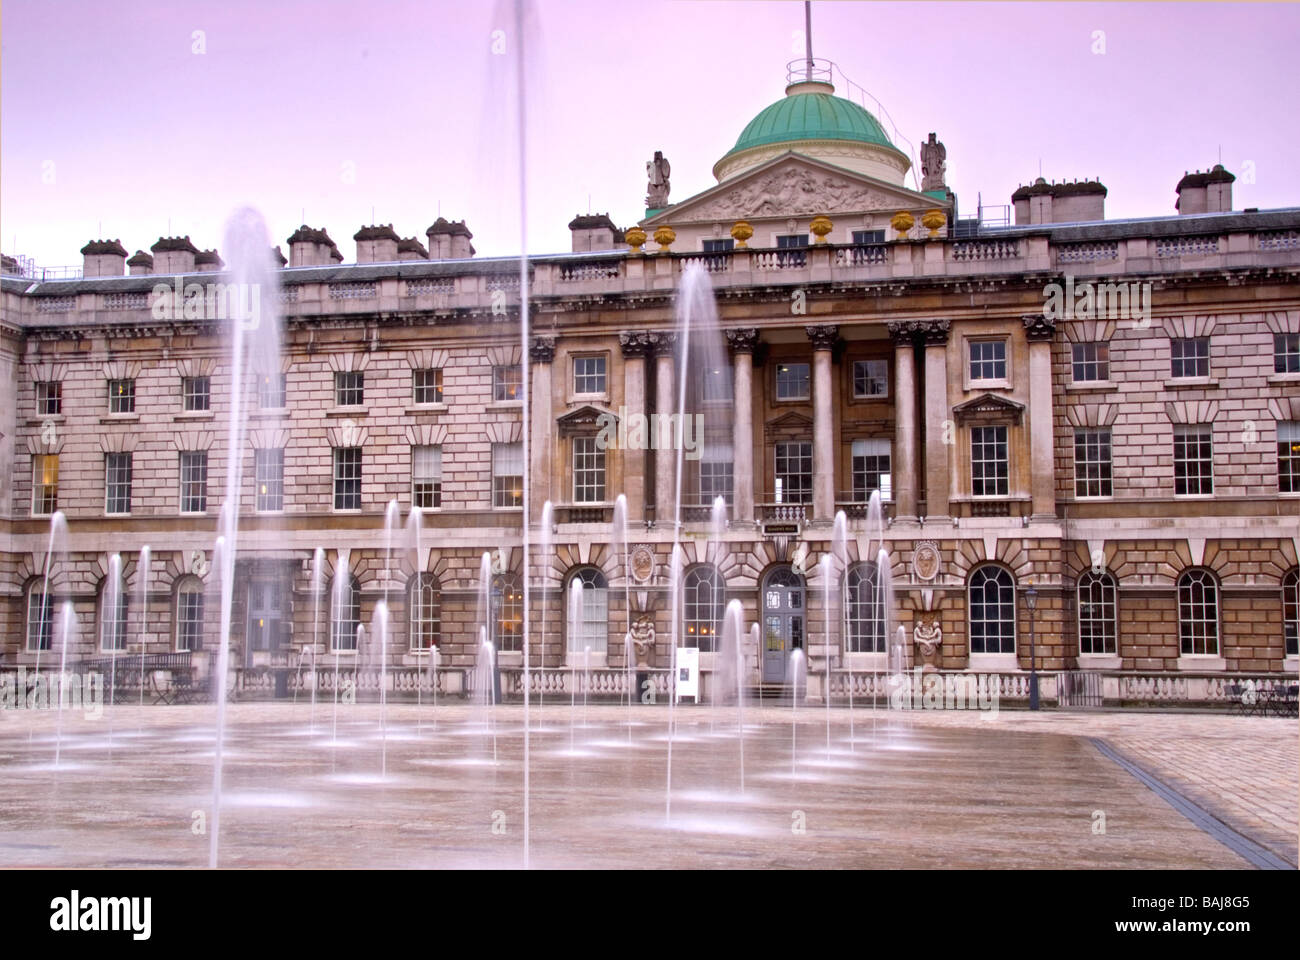 The central courtyard of Somerset House in London. The dancing fountains were installed in the 1990s. Stock Photo